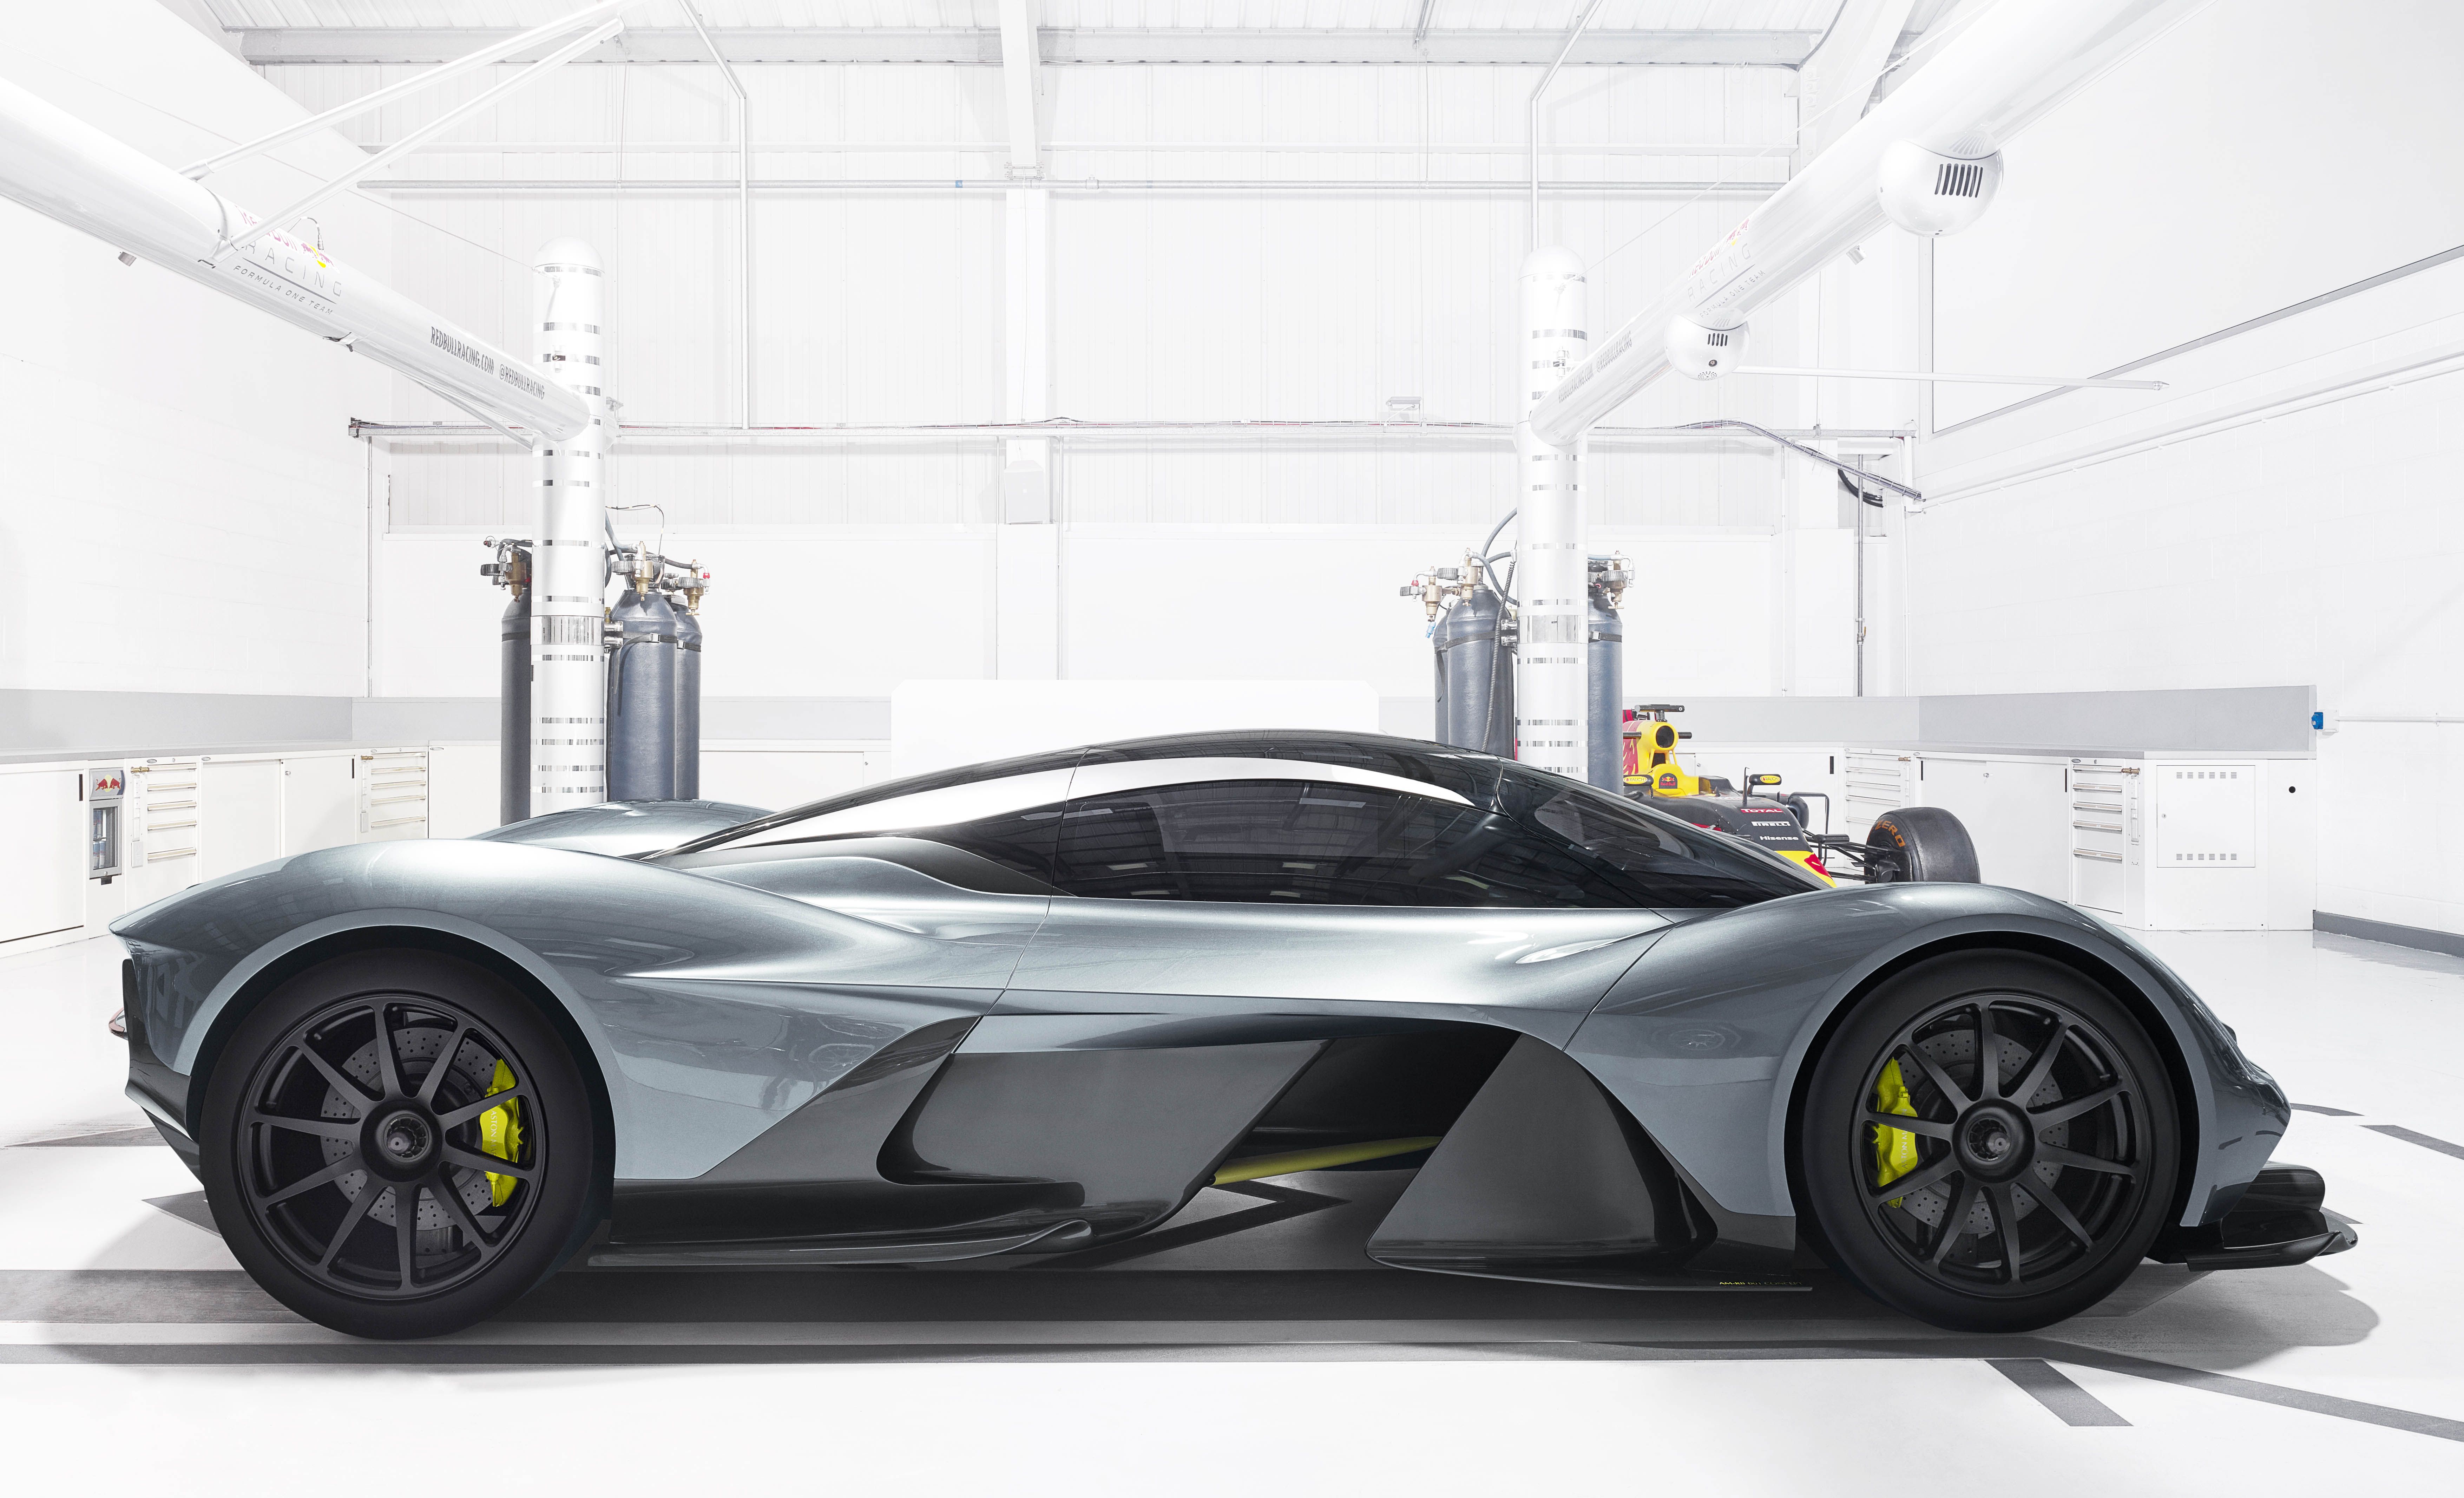 Bad News Oligarchs: Aston Martin and Red Bull's 250-MPH Hypercar Is Out